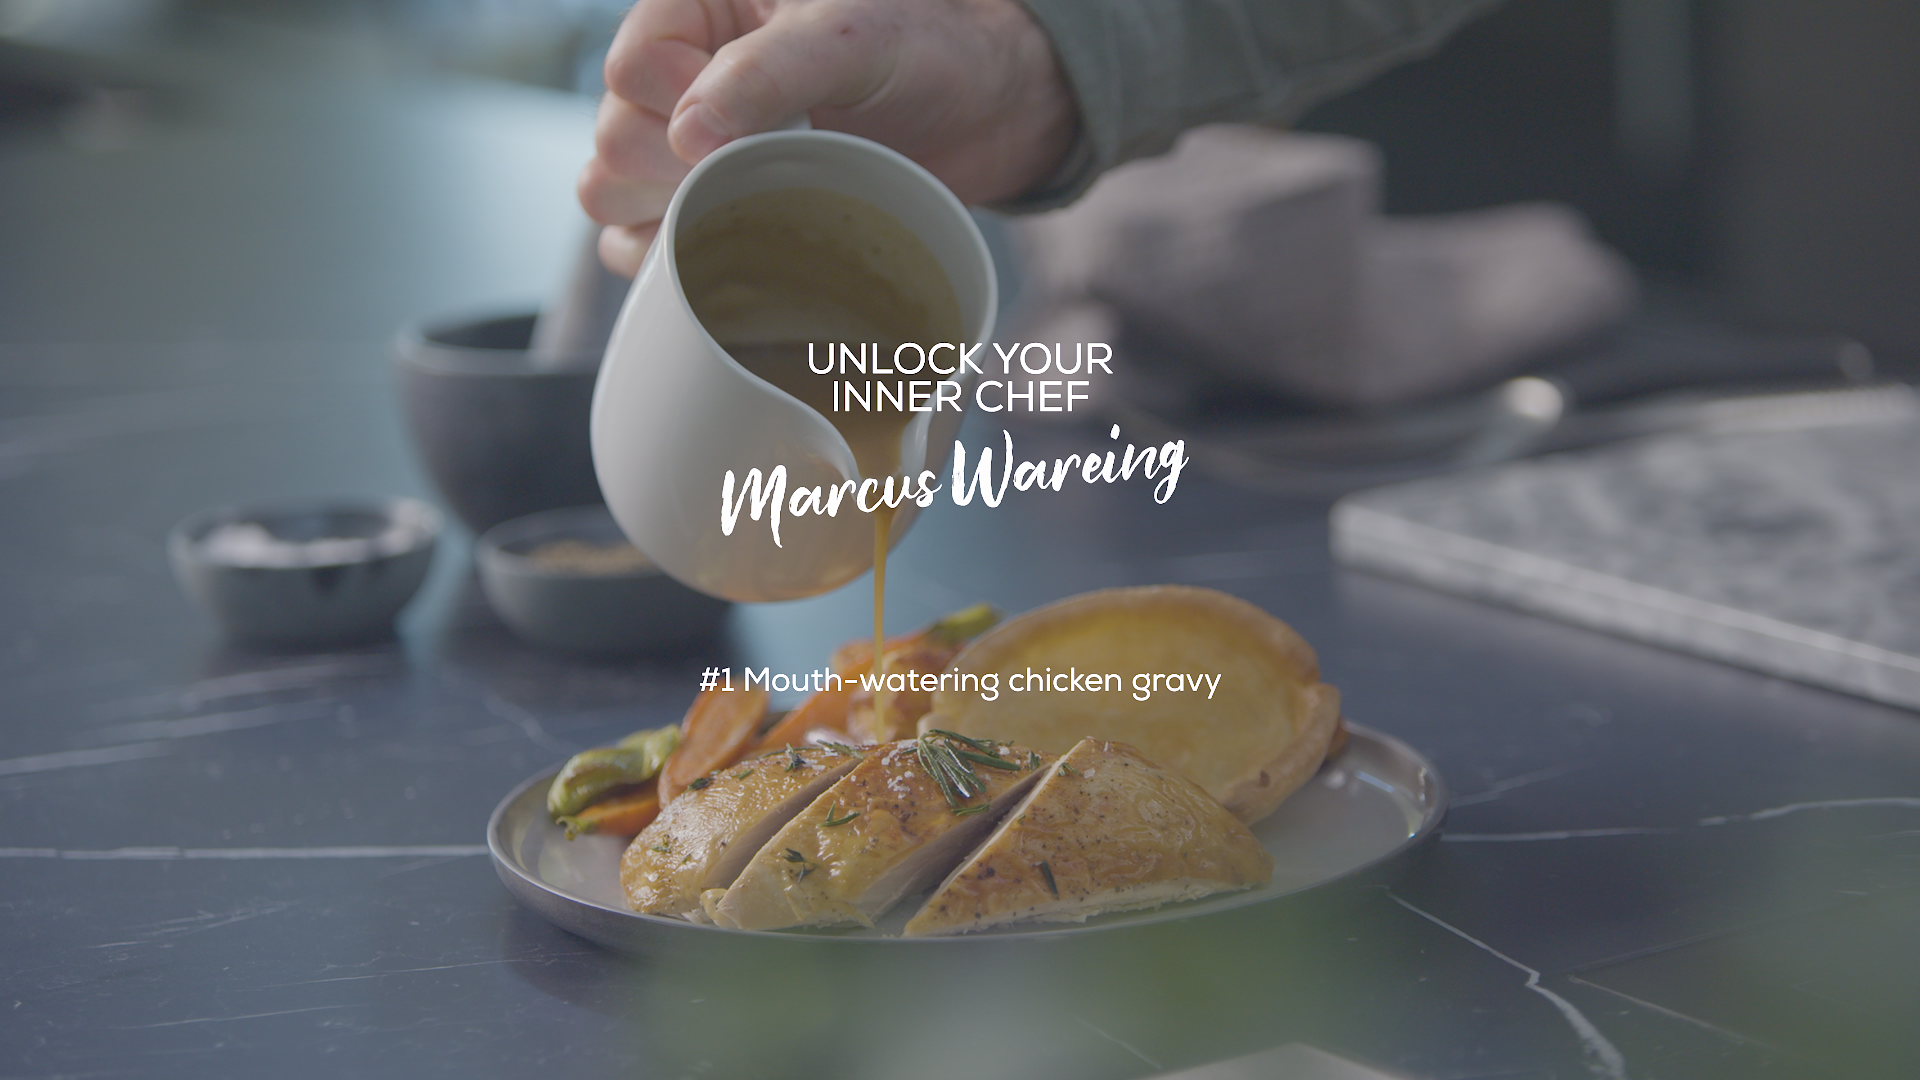 Unlock your inner chef with Marcus Wareing: #1 Mouth-Watering Chicken Gravy